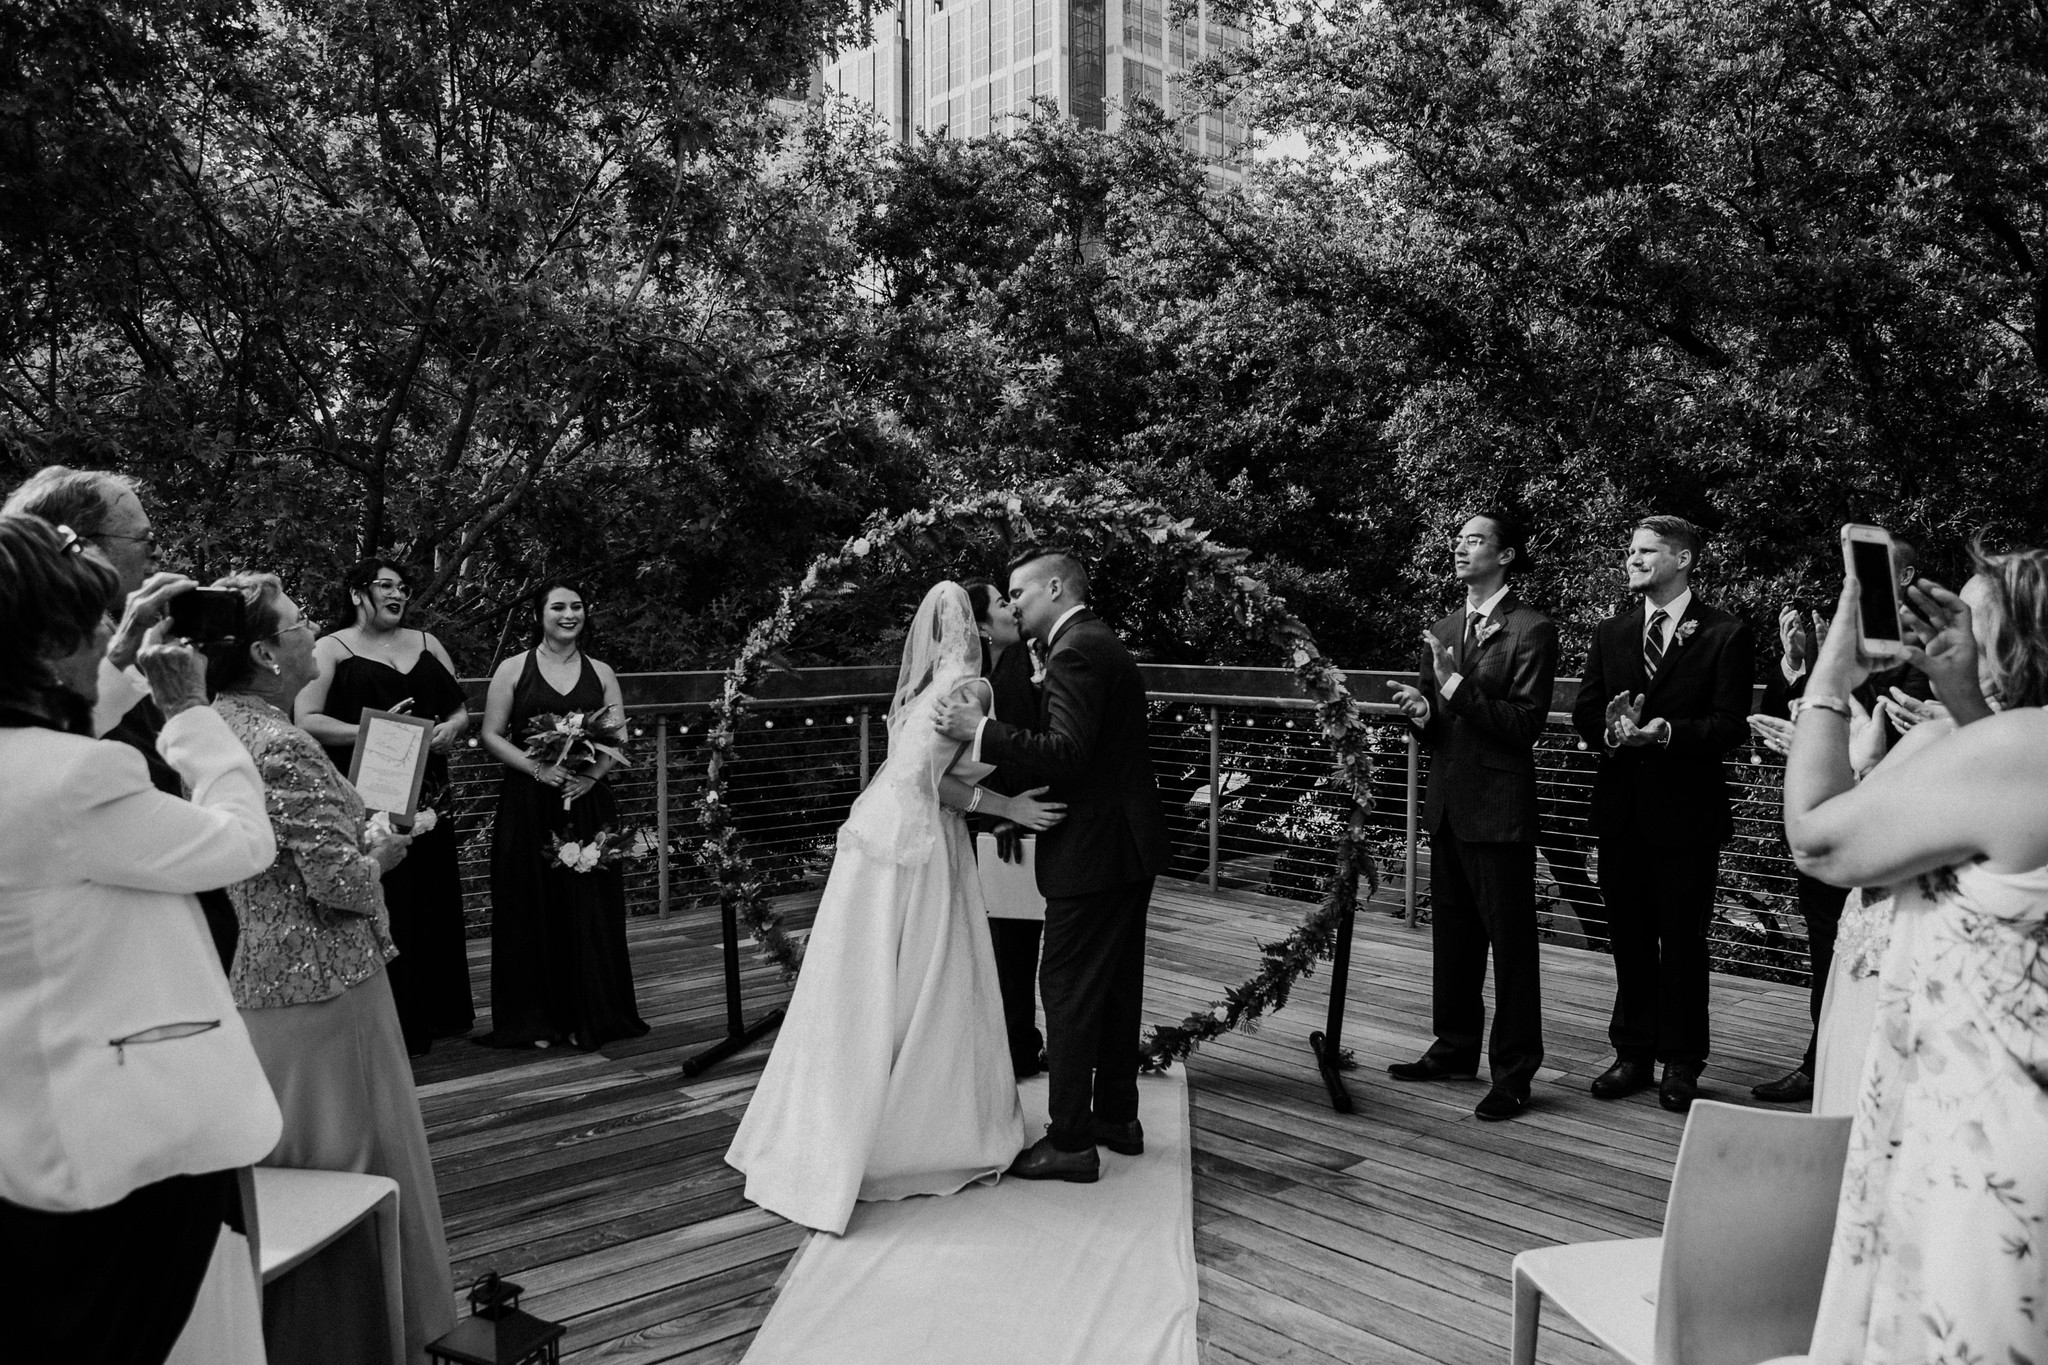 Ceremony. Wedding at The Grove at Discovery Green Park (Houston, TX)